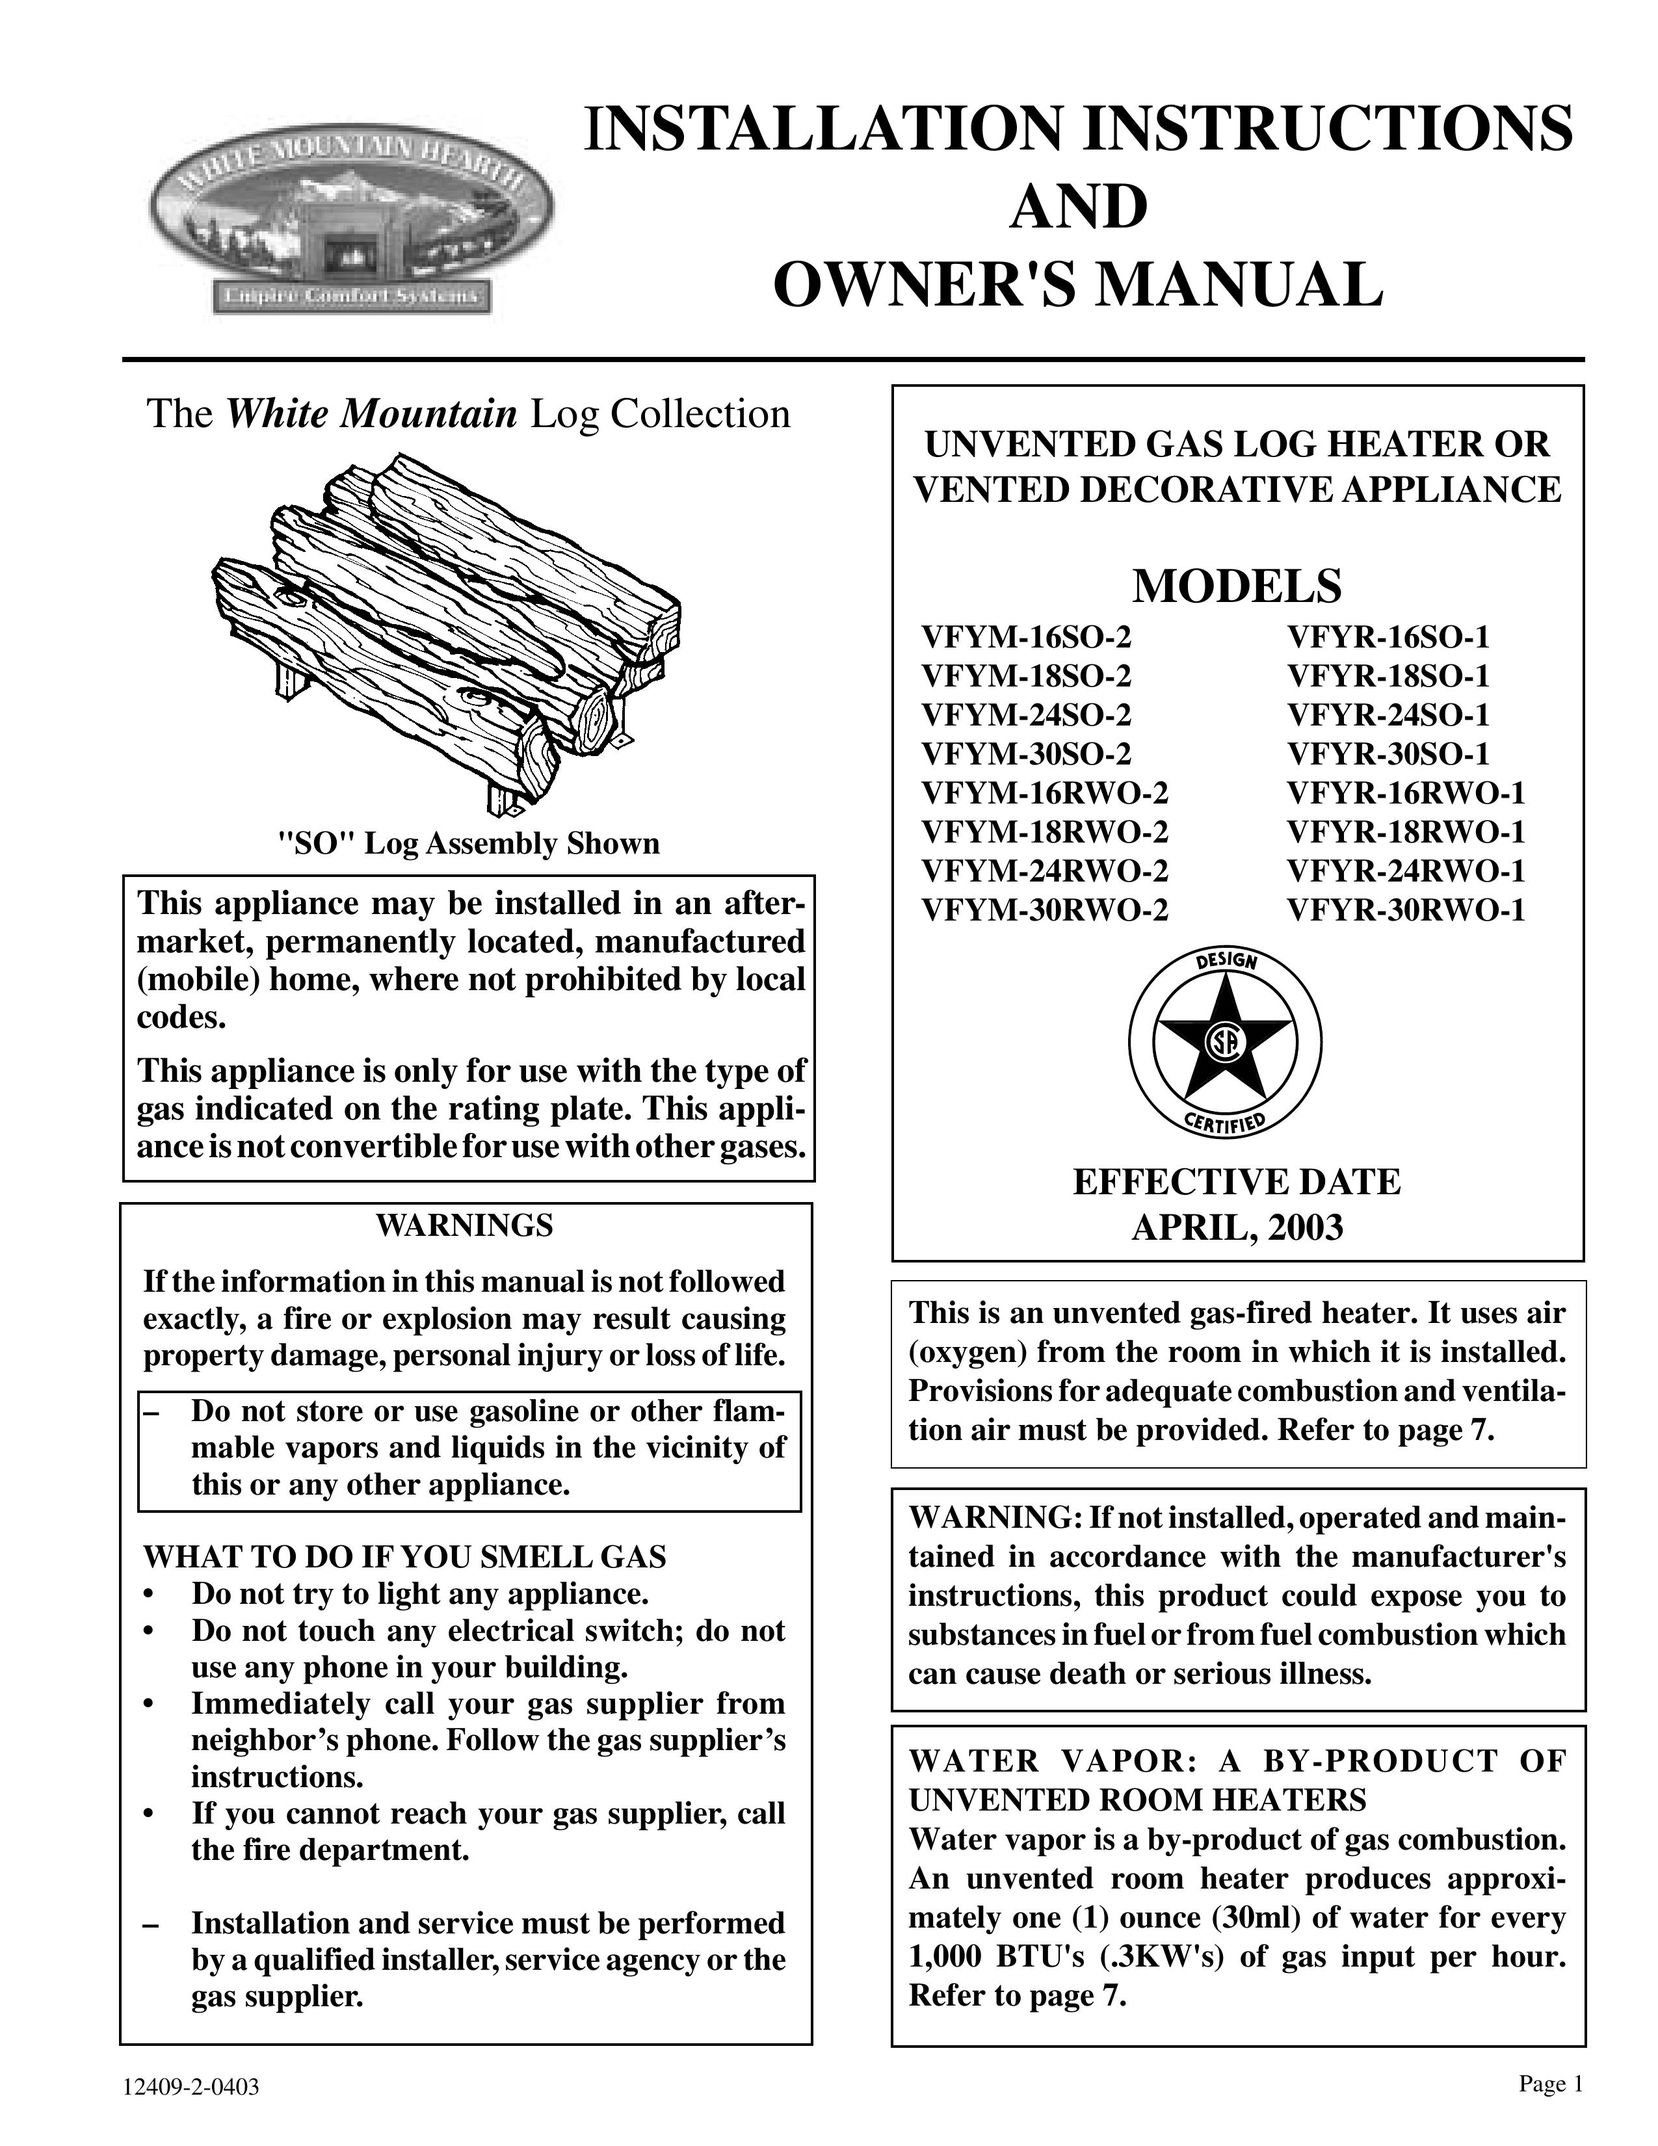 Empire Comfort Systems VFYM-18RWO-2 Water Heater User Manual